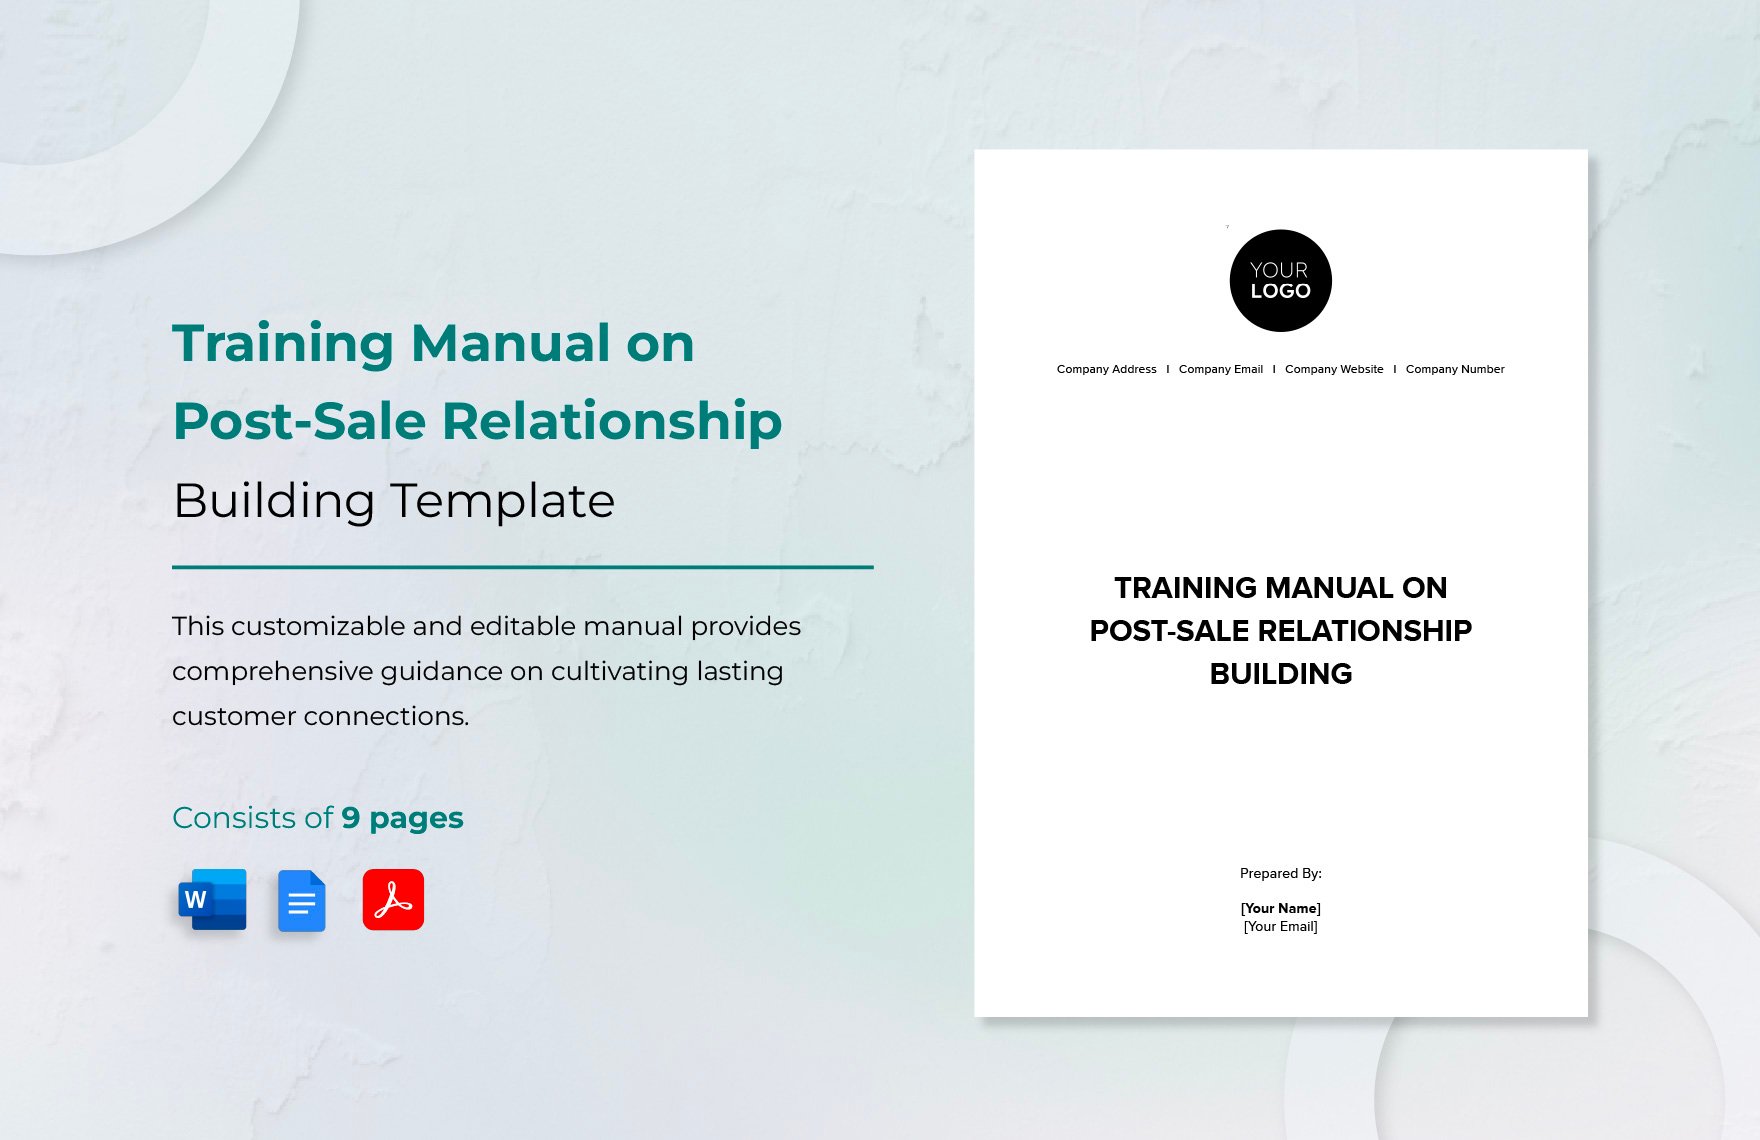 Training Manual on Post-Sale Relationship Building Template